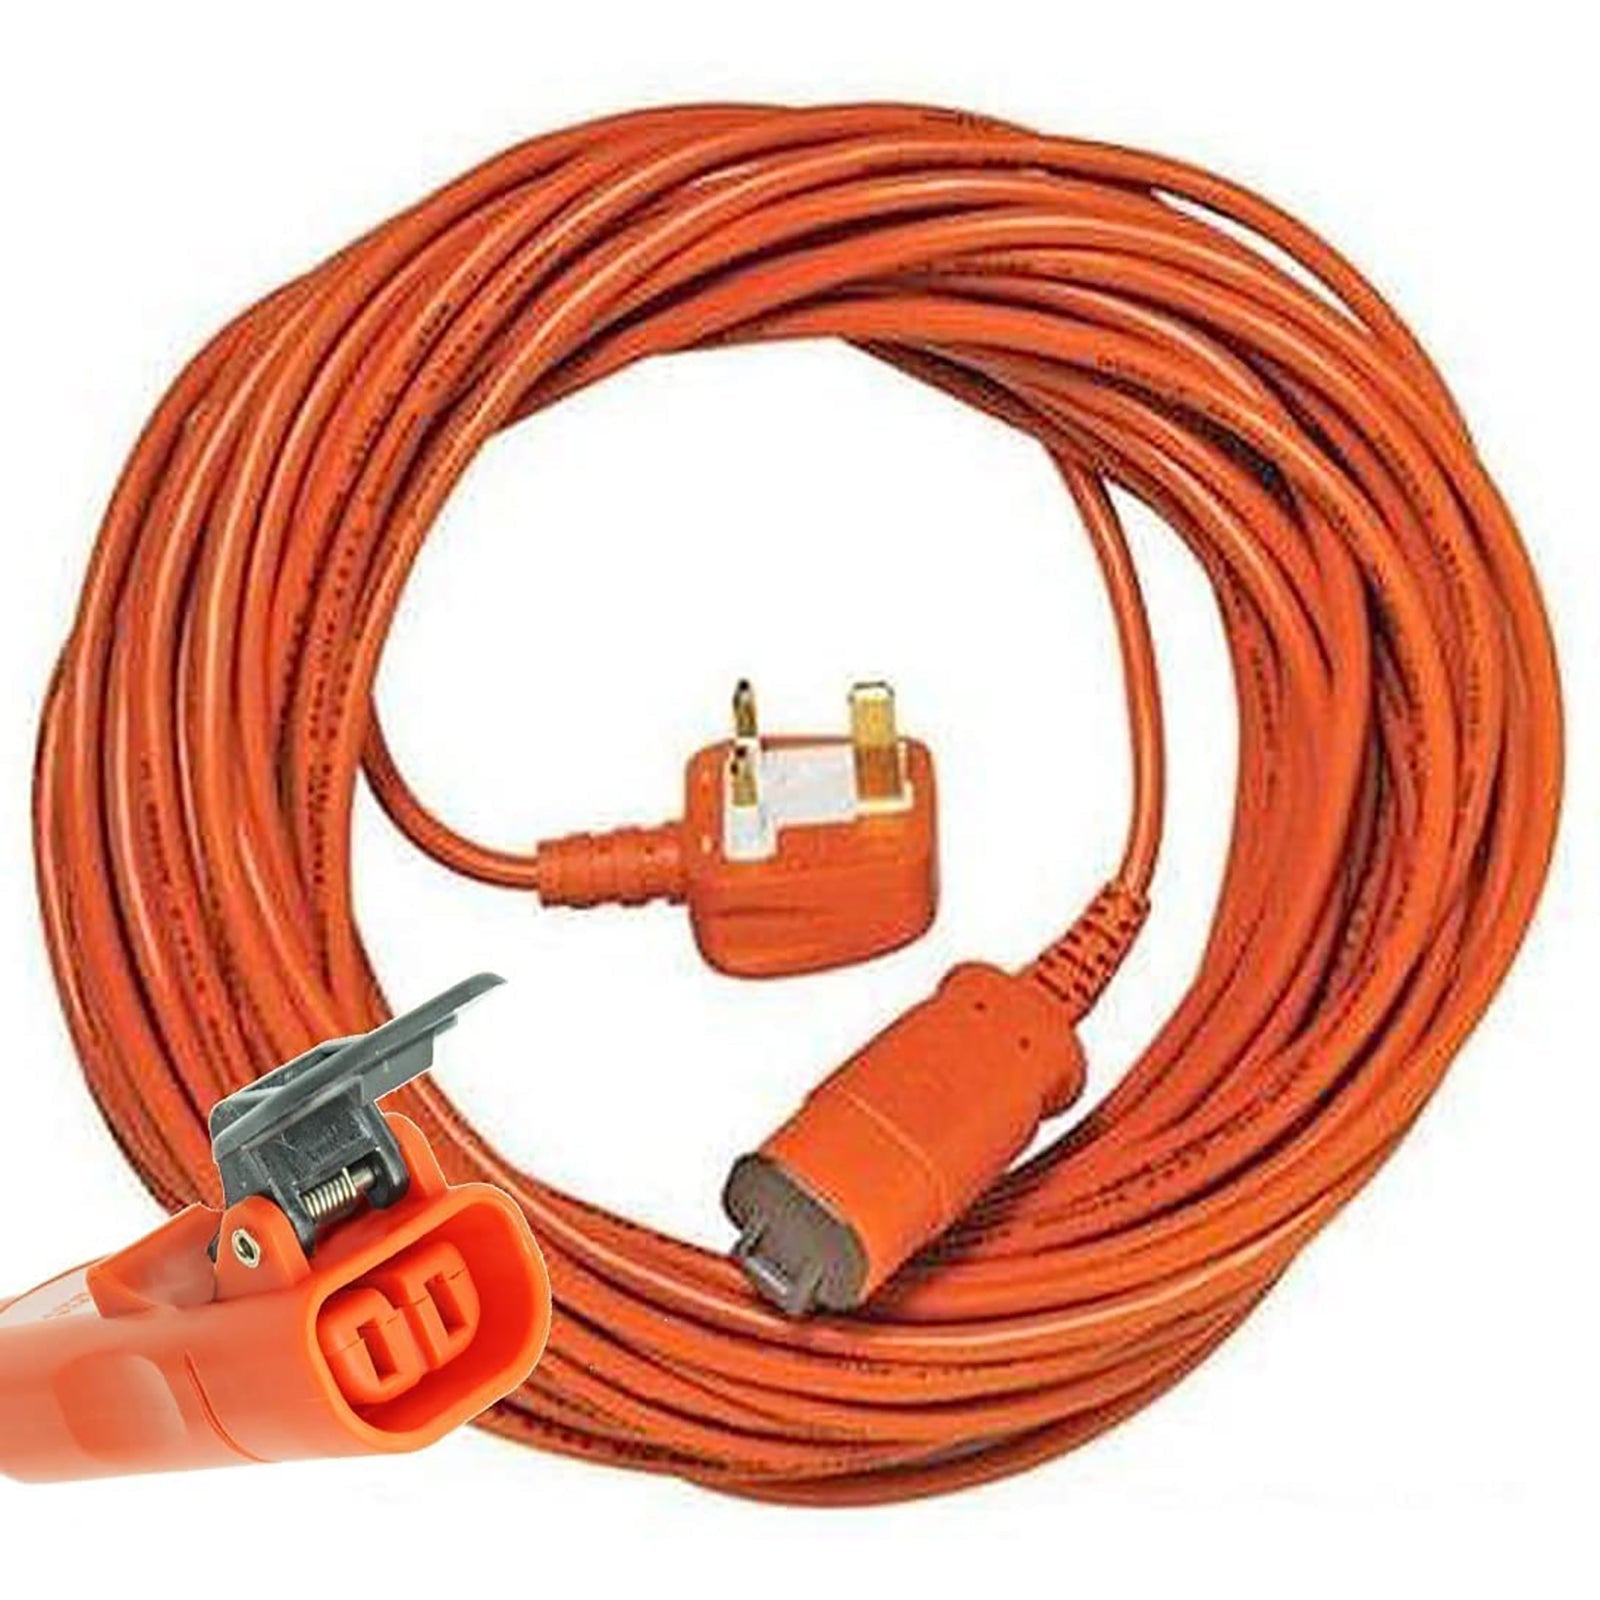 Cable for Flymo Lawnmower Turbo 400 Turbo Compact Hedge Trimmer Metre Lead Plug (15m)